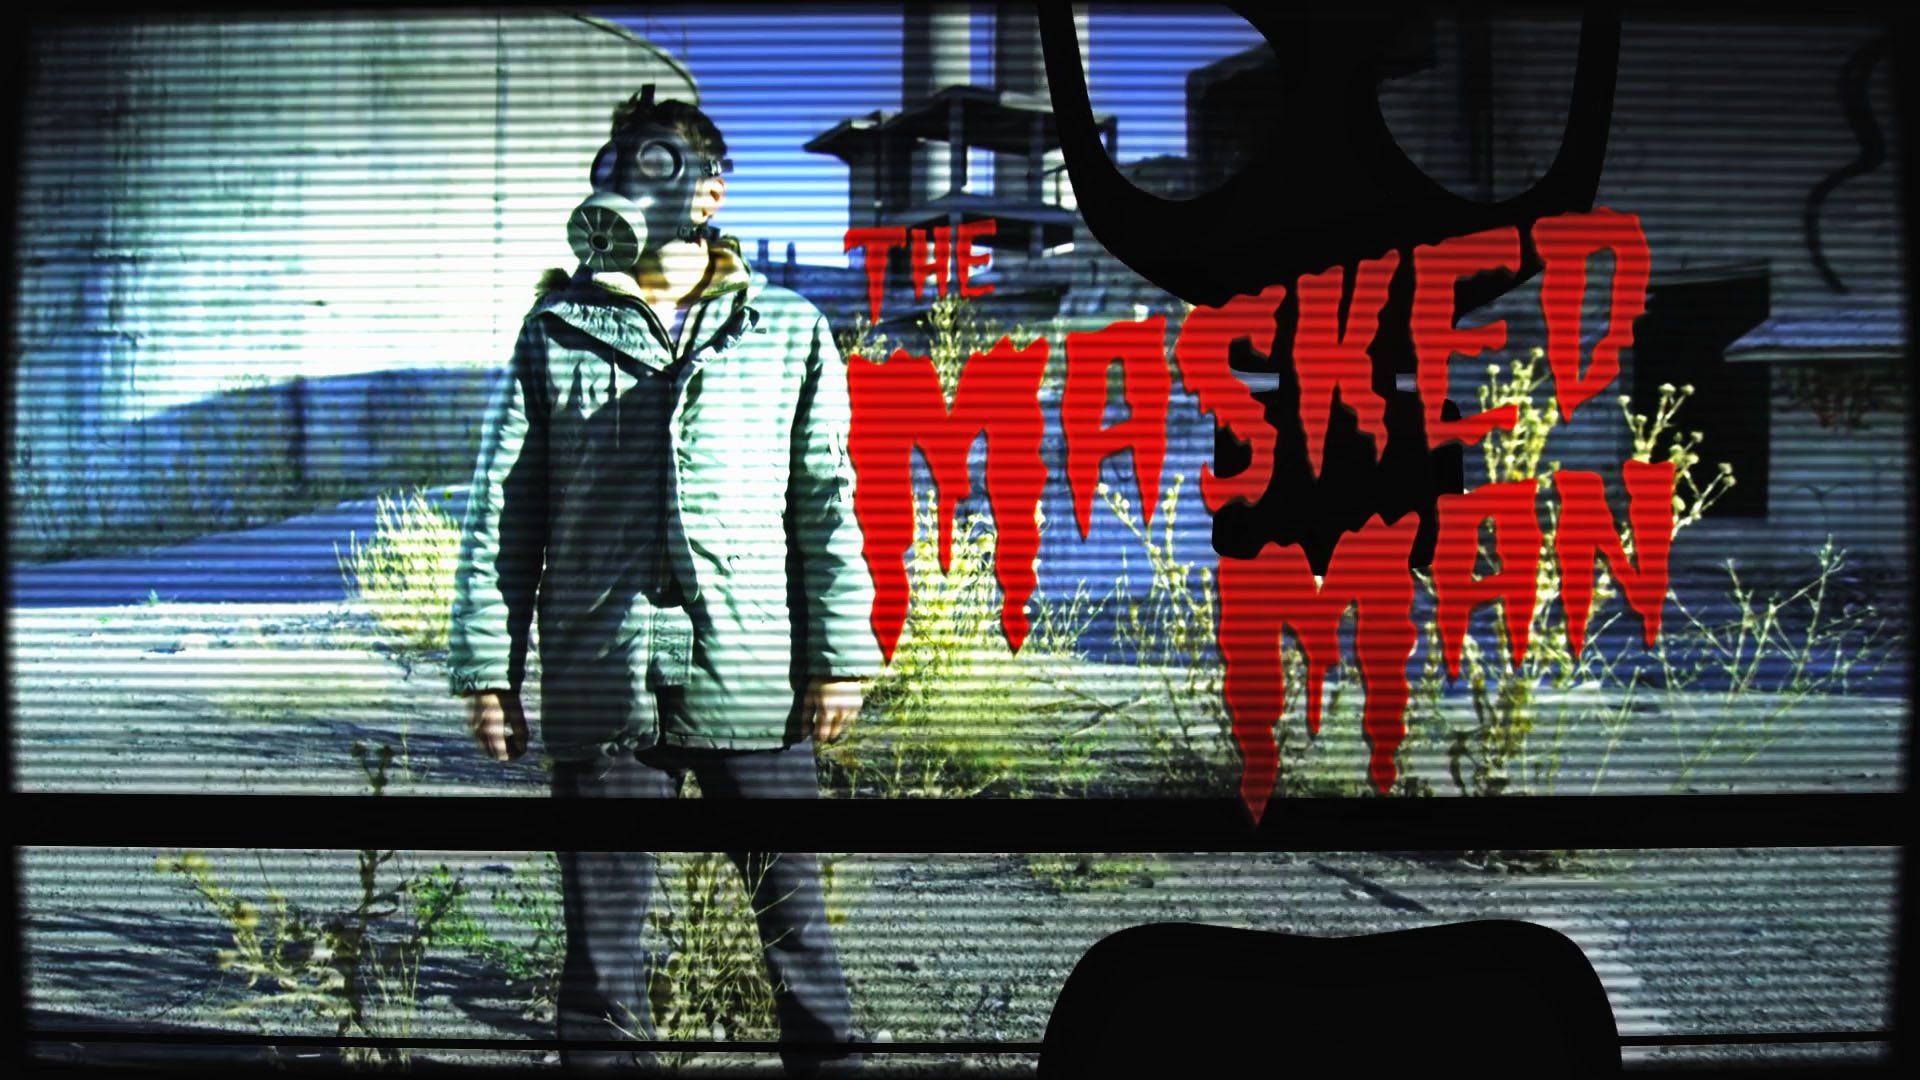 The Masked Man Movie Title